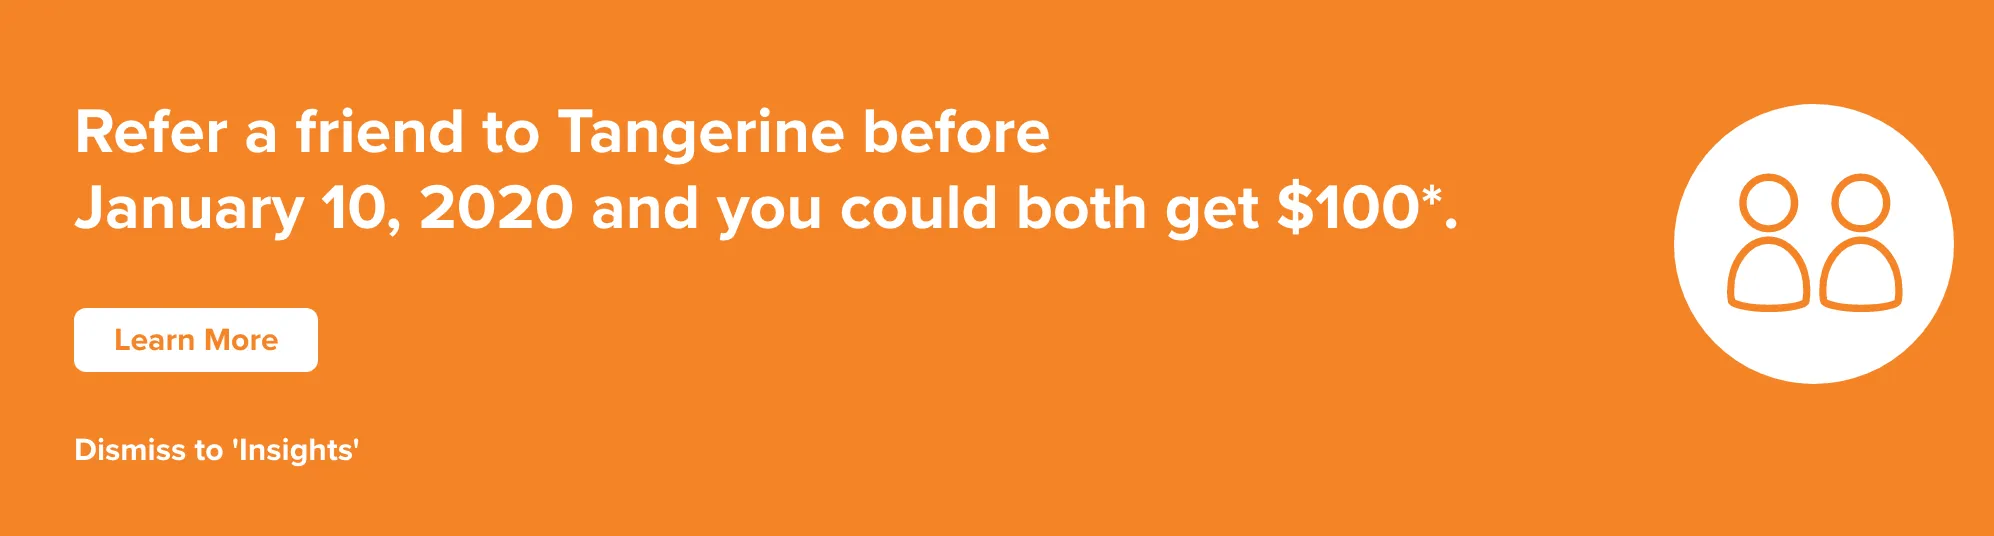 An orange background with white text on the left that says "Refer a friend to Tangerine before January 10th, 2020 and you both could get $100*". Below that is an orange text that says "Dismiss to Insights". On the right side is an abstract illustration of two people inside a white circle. The illustration features circle heads and semicircle bodies.